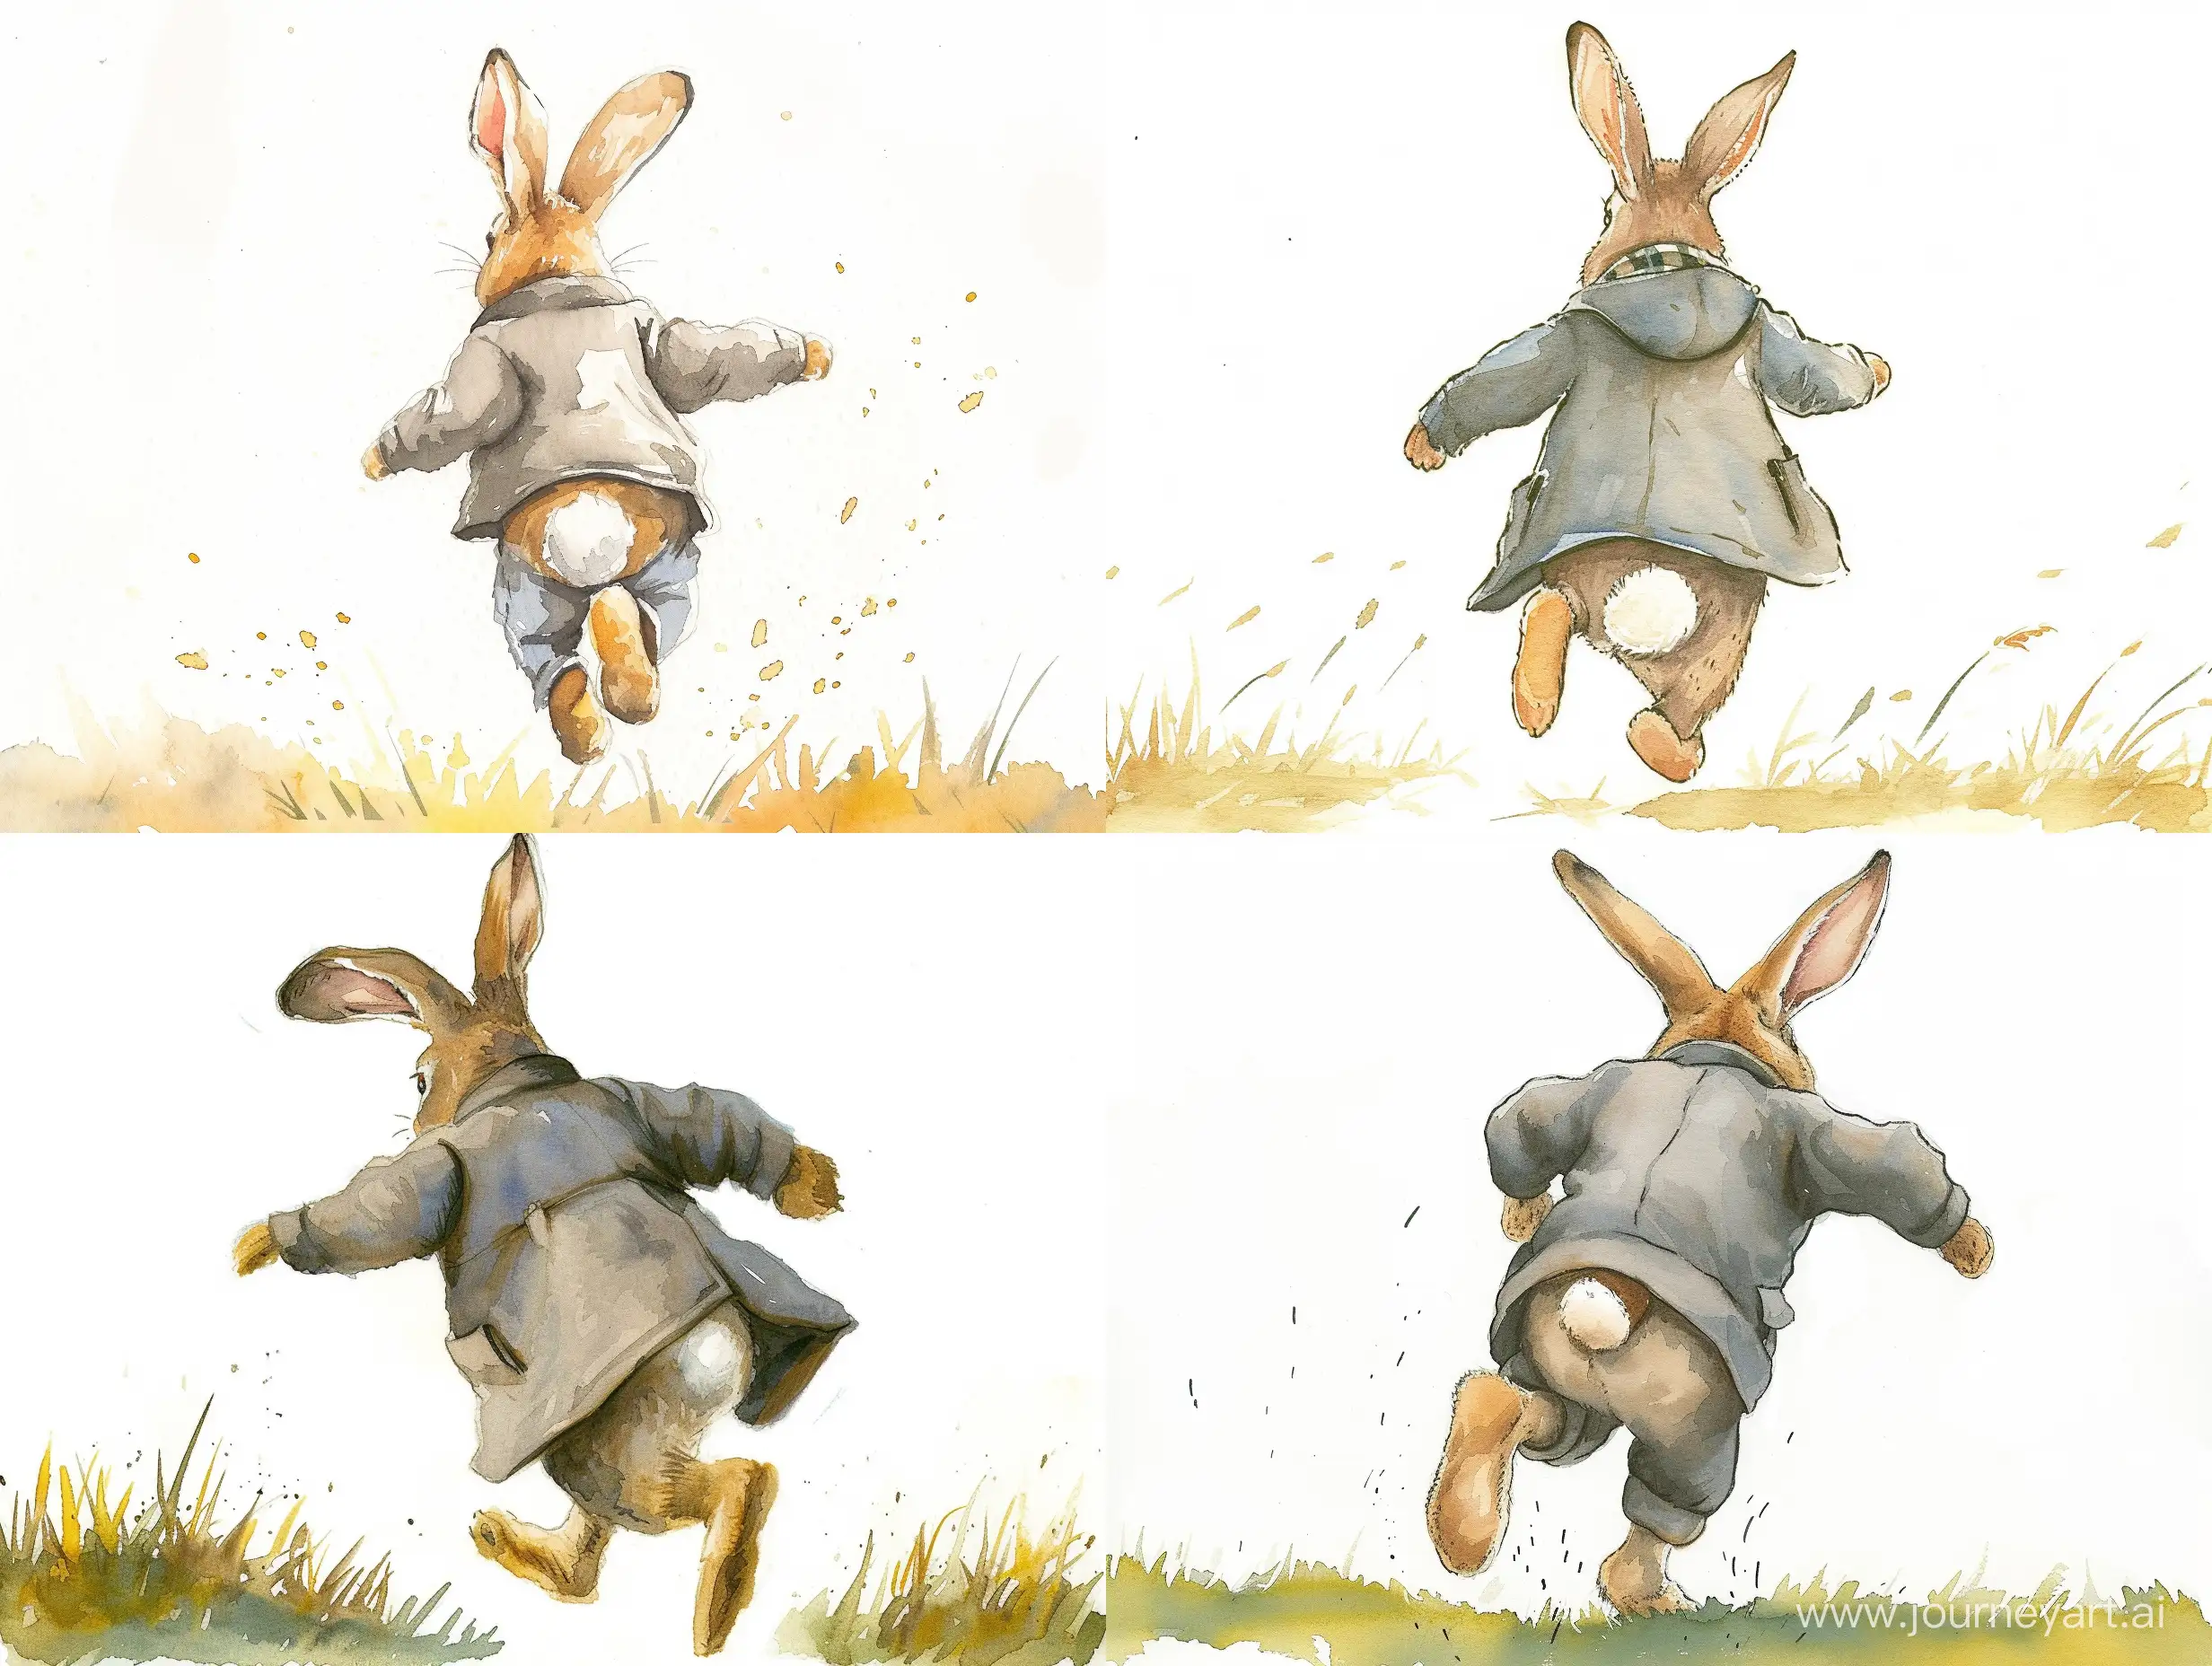 Watercolor drawing of an anthropomorphic rabbit in outerwear running away from us with its back. We can see his back